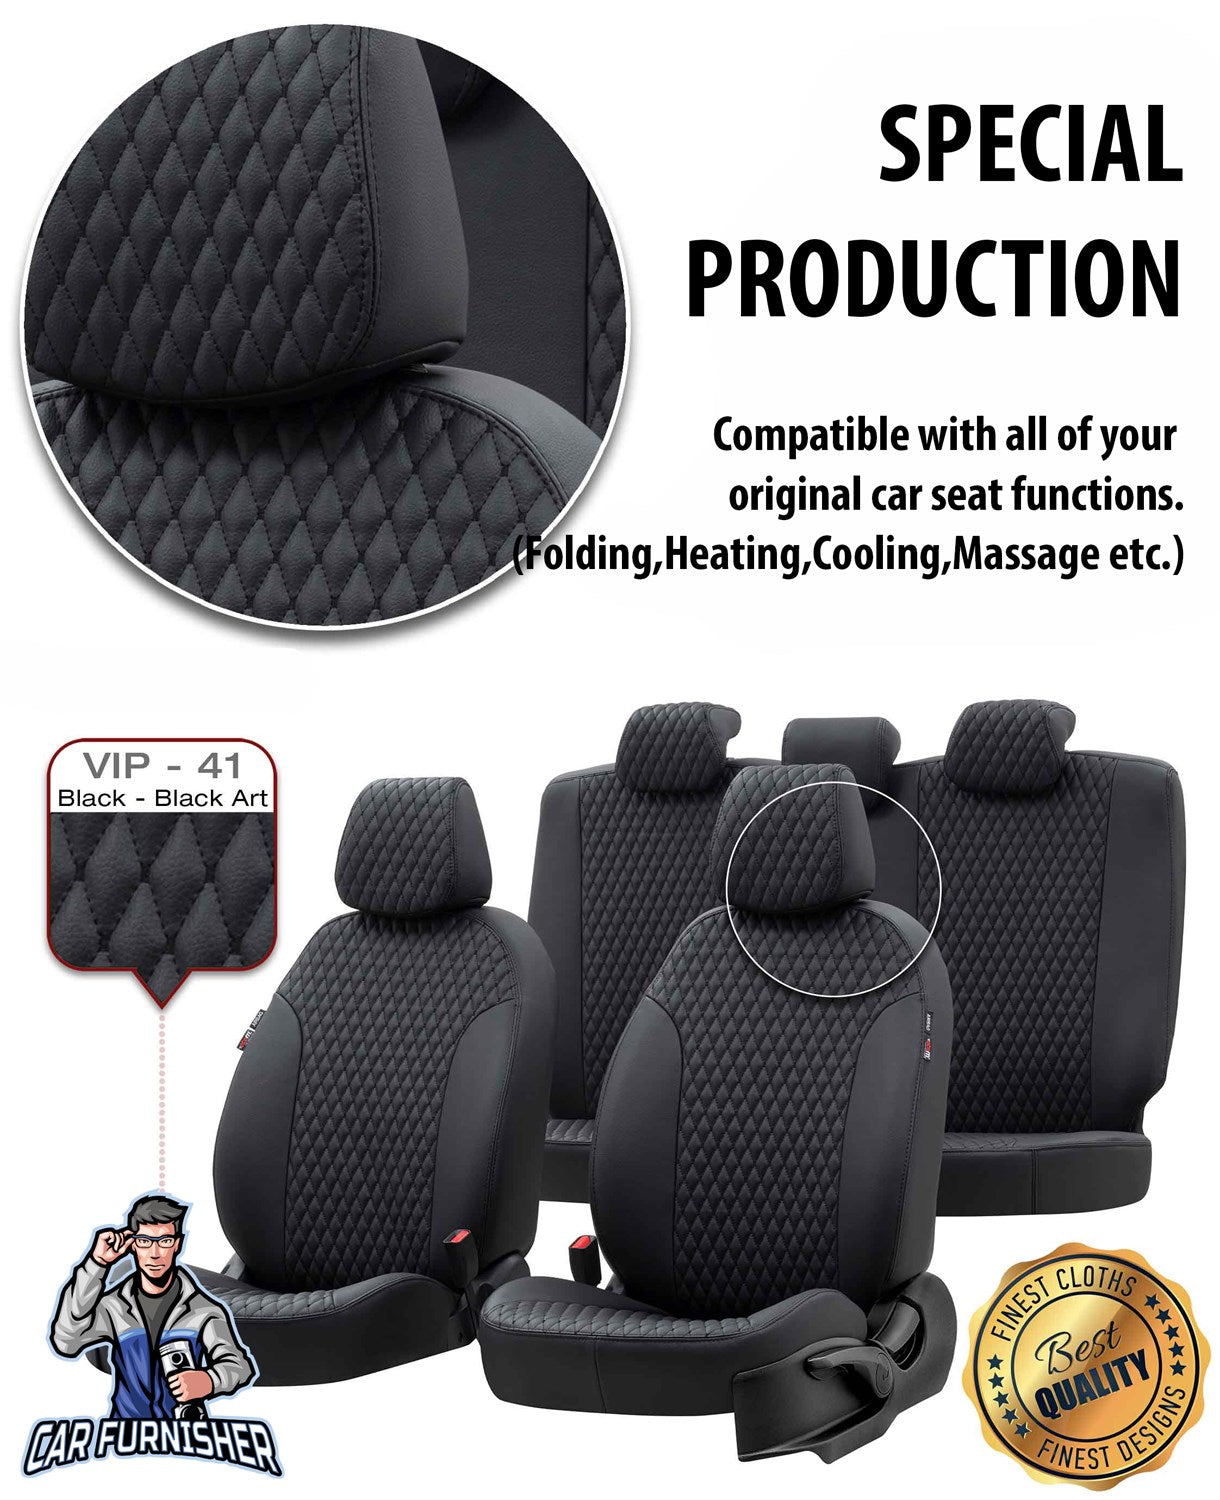 Renault Megane Seat Covers Amsterdam Leather Design Black Leather